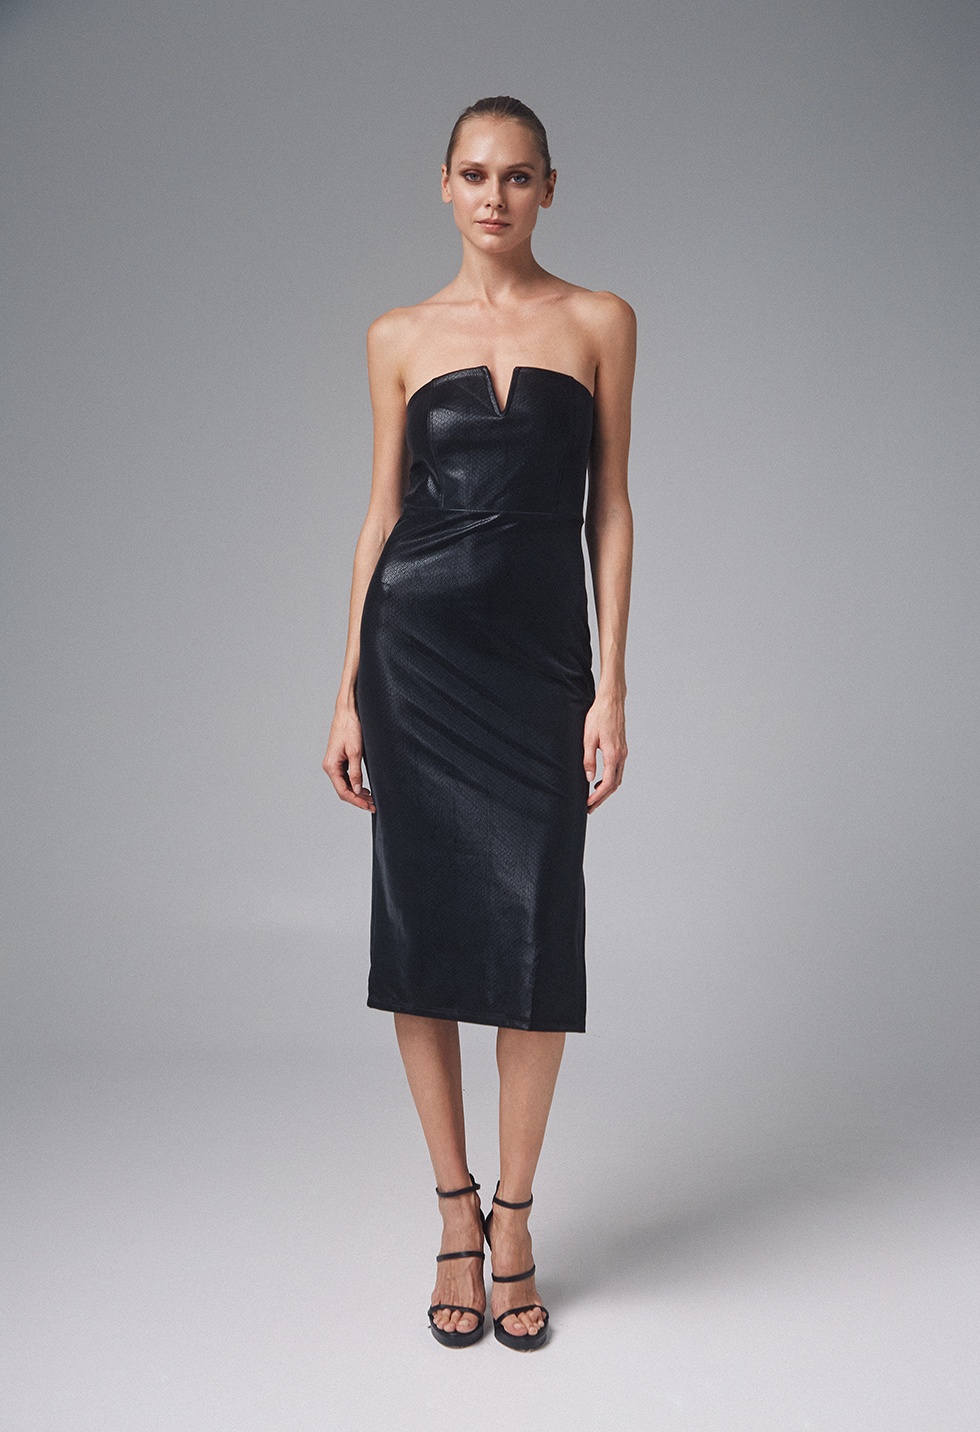 Strapless dress with leather effect